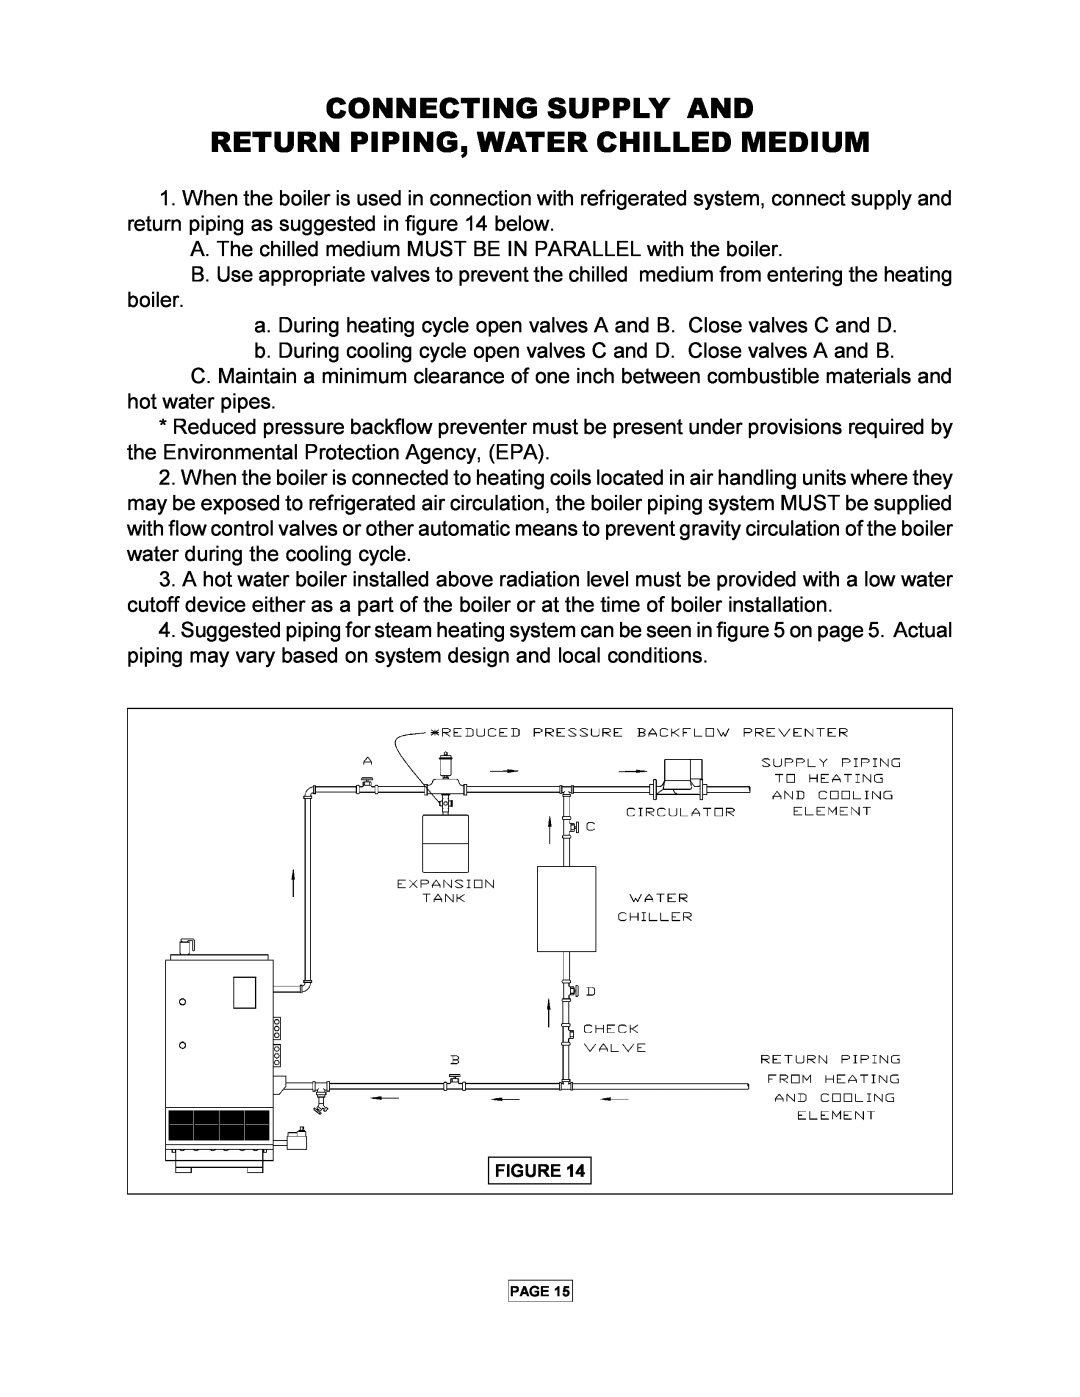 Utica PEG-C installation manual Connecting Supply And, Return Piping, Water Chilled Medium 